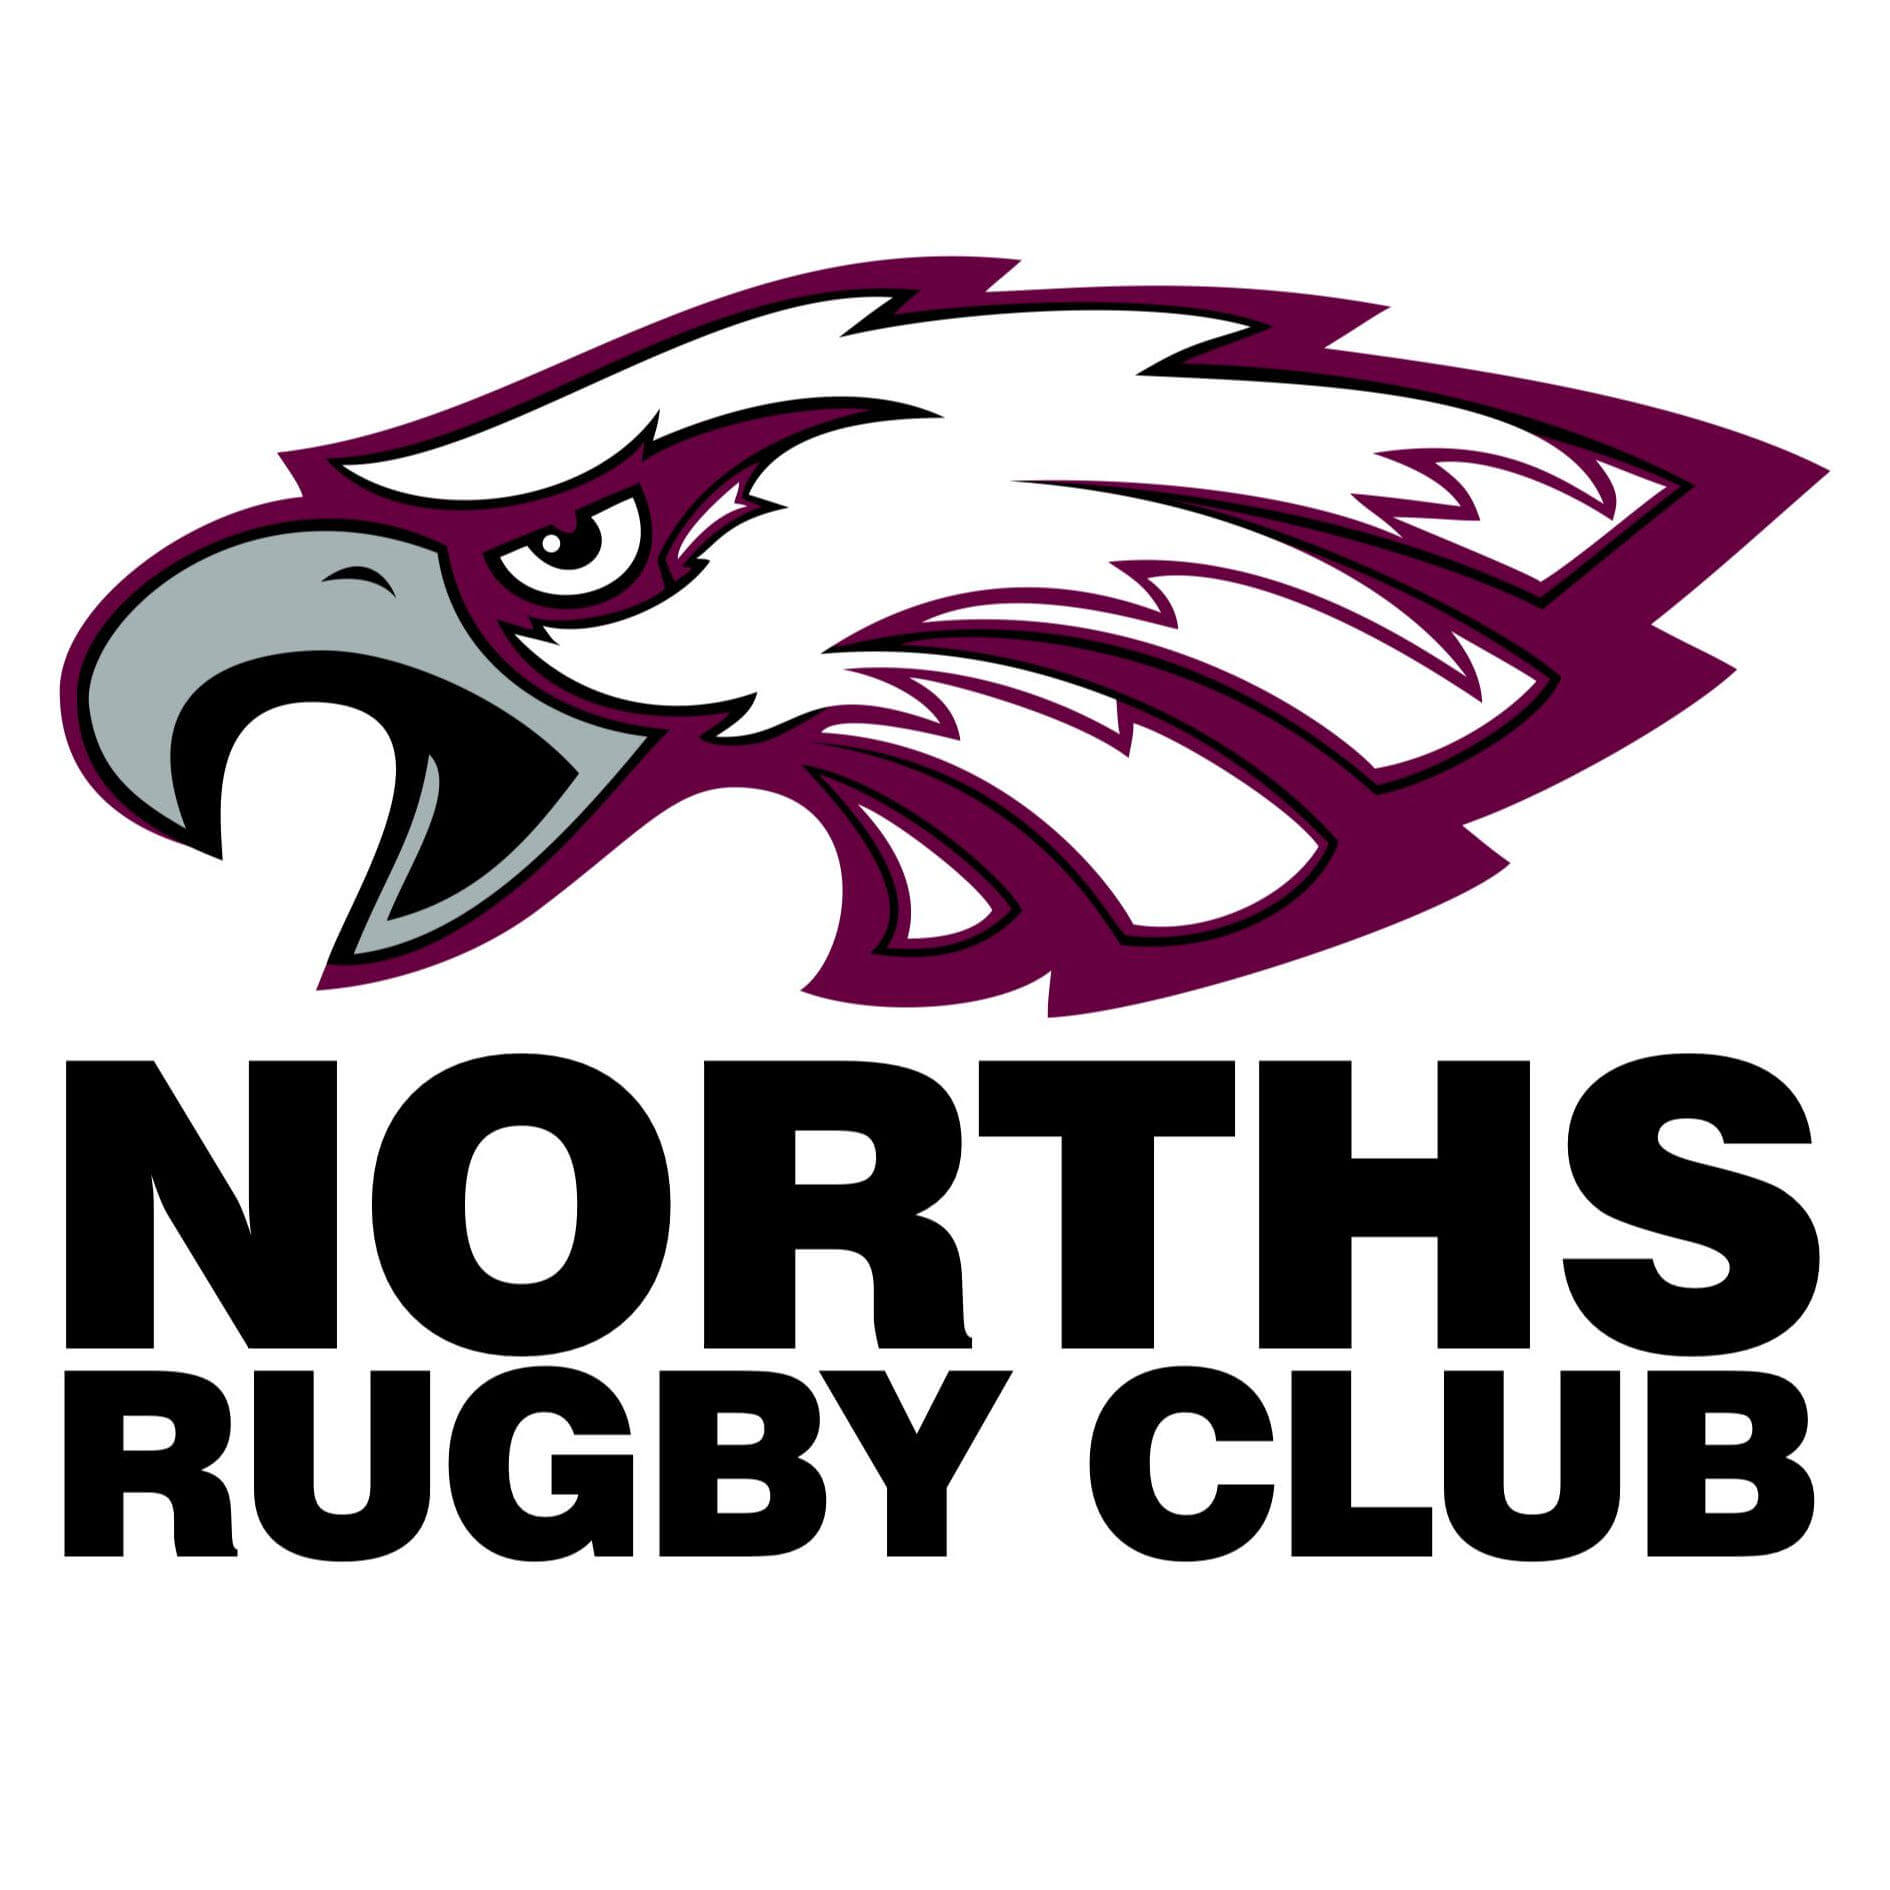 Norths Rugby Club Physiotherapists - RSP Physiotherapy